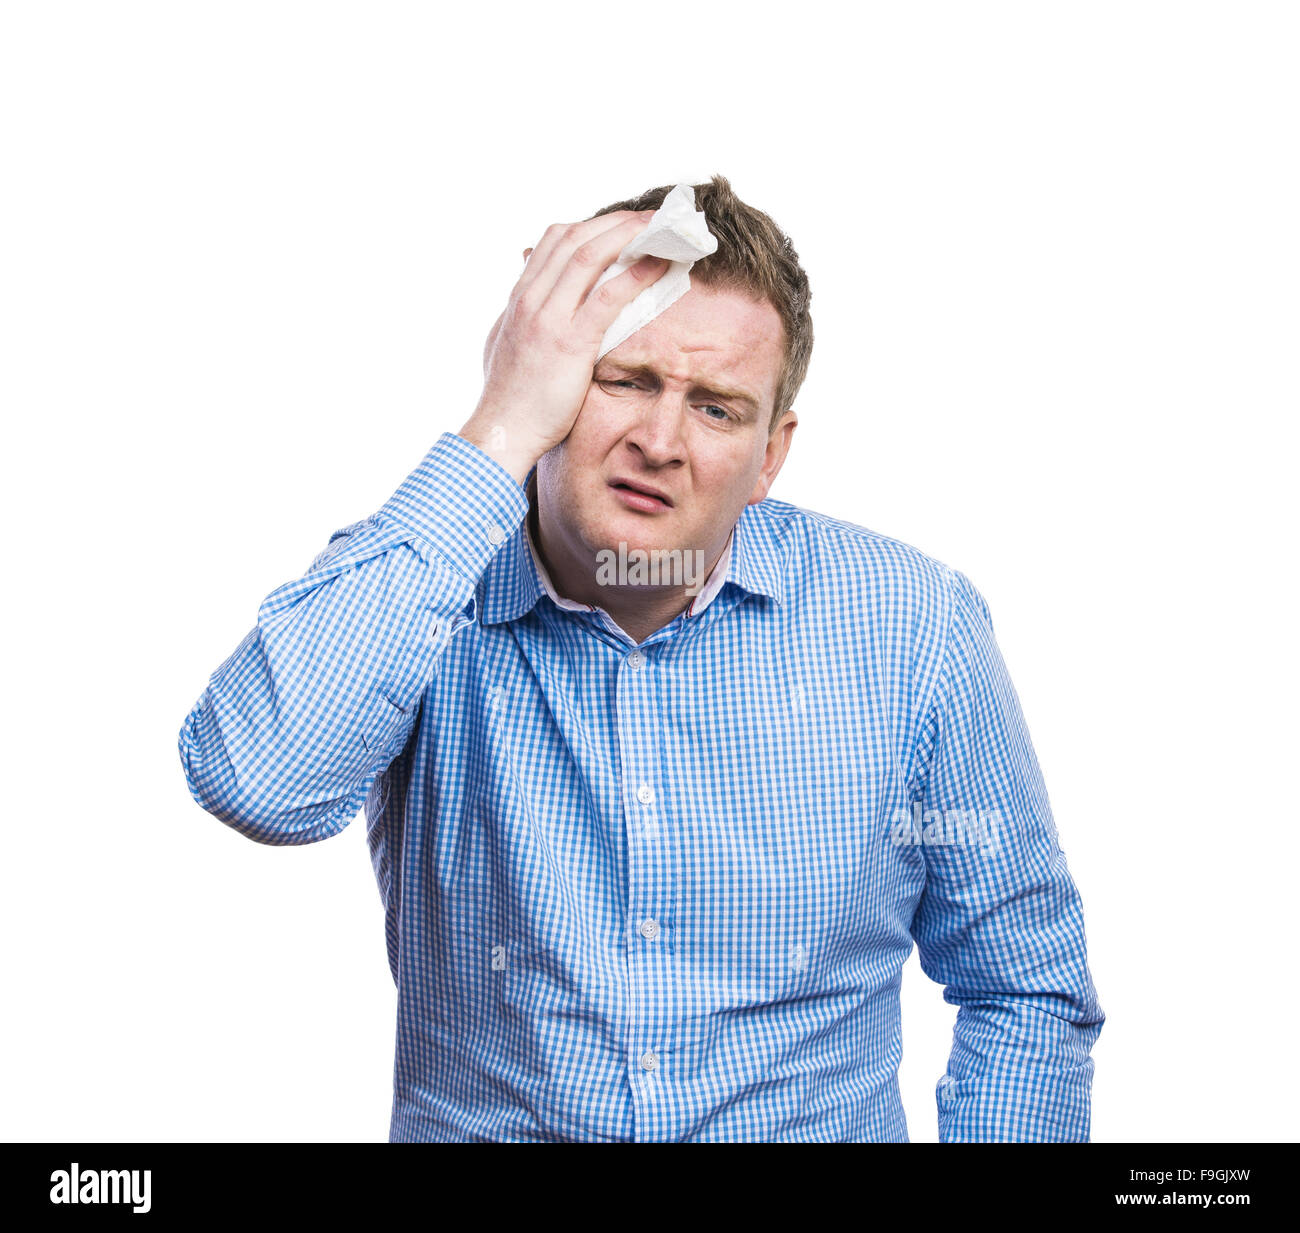 Funny young drunk man with headache. Studio shot on white background. Stock Photo